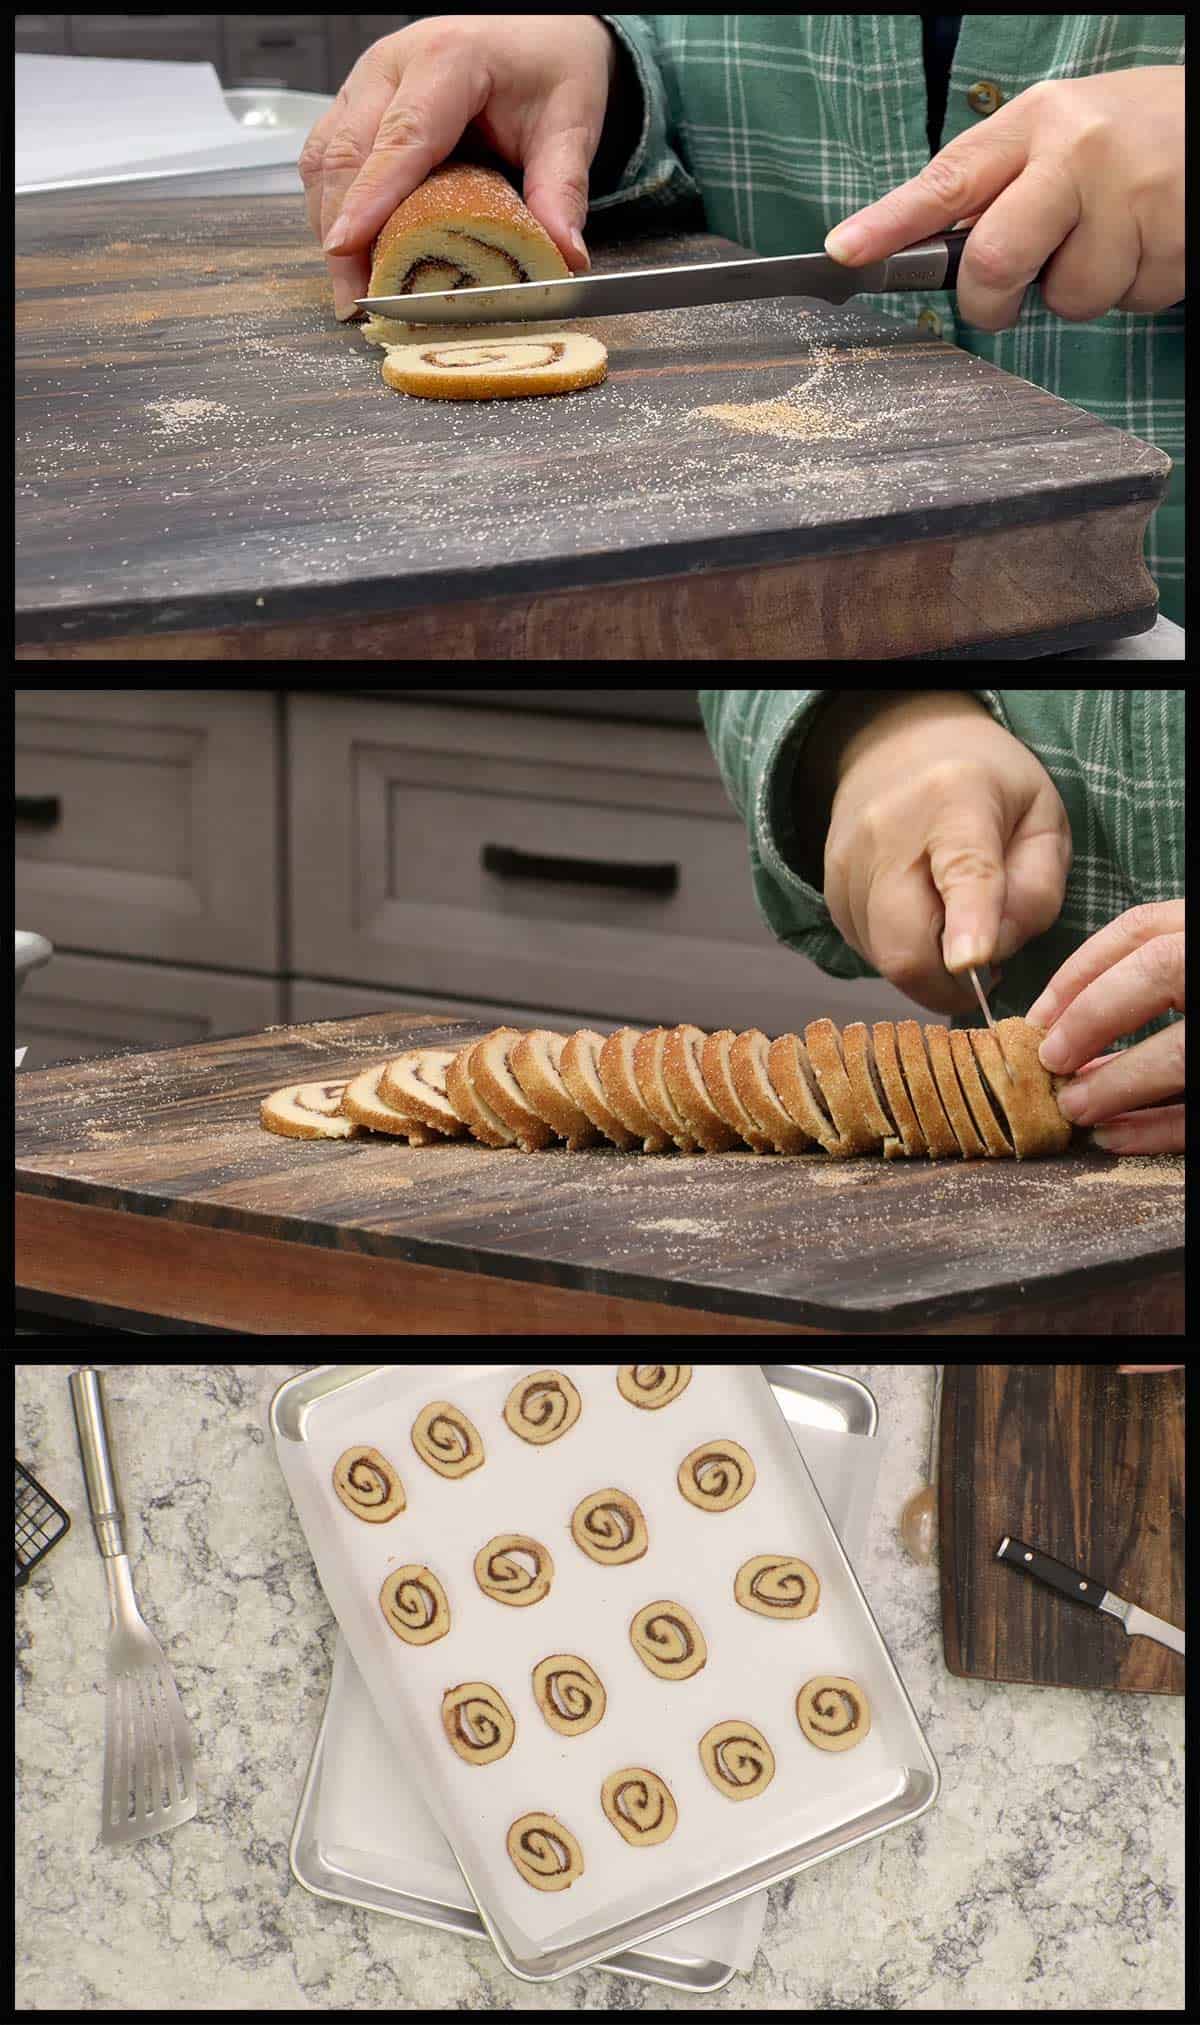 slicing the log into ¼" cookie slices.